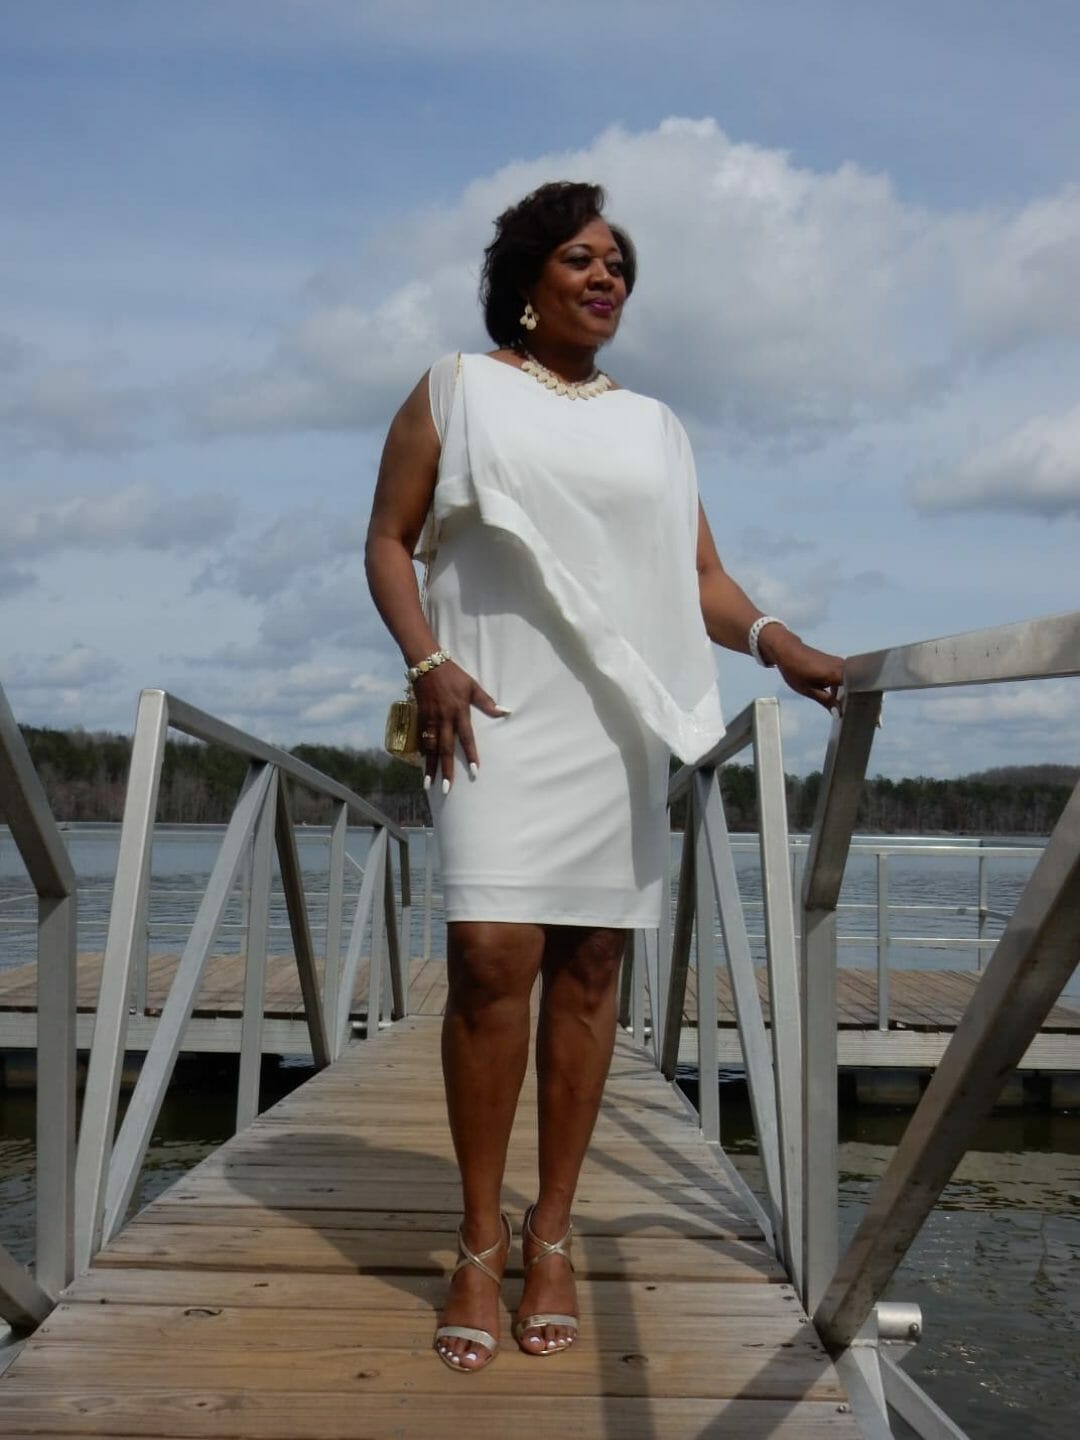 A Midnight Velvet customer on a pier, in a white dress with satin trim on the cape-like top, and silver heeled sandals.